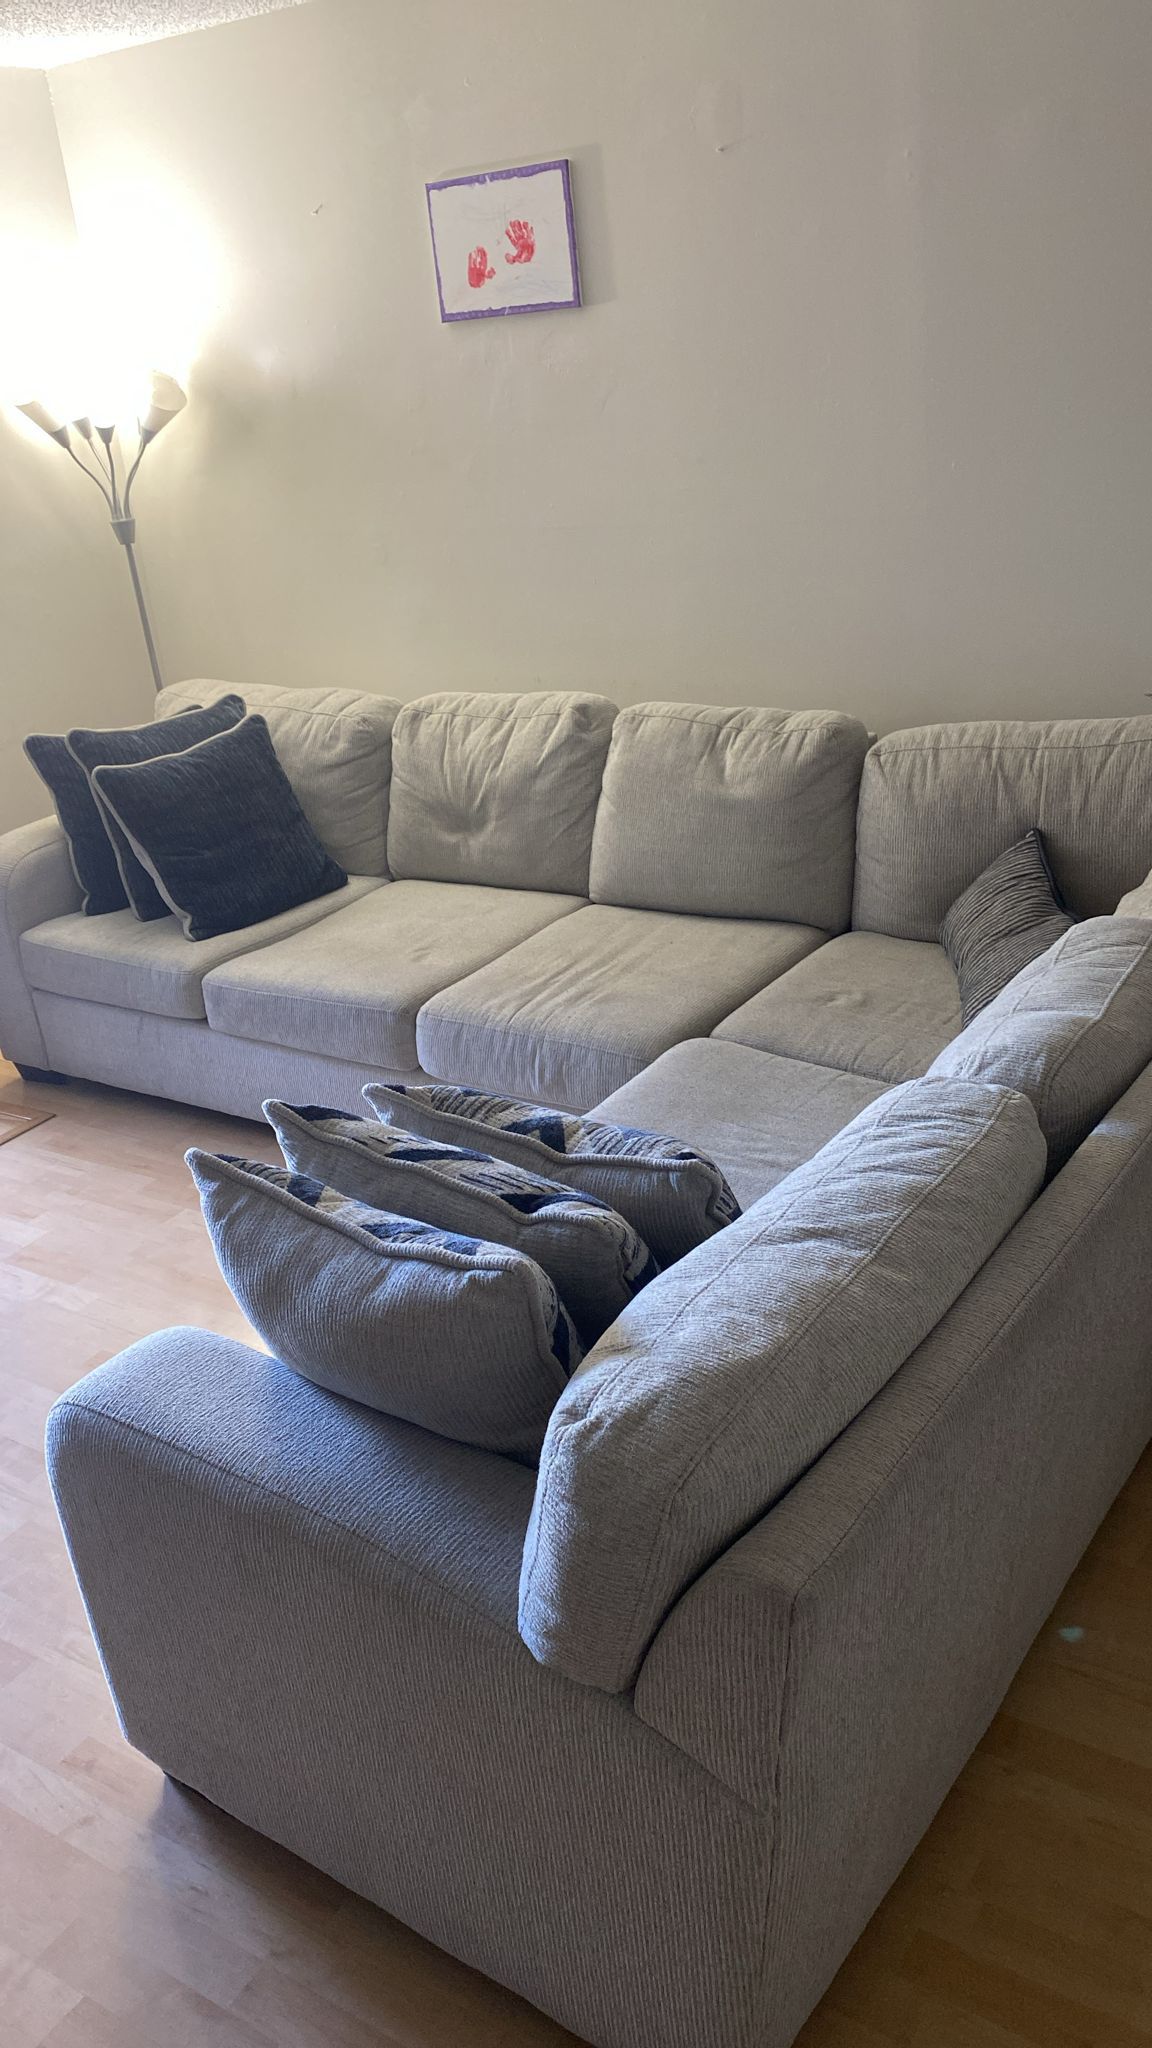 SECTIONAL SOFA UP TO 6 PEOPLE CAP GREY AS NEW ROOMS TO GO BEDFORD